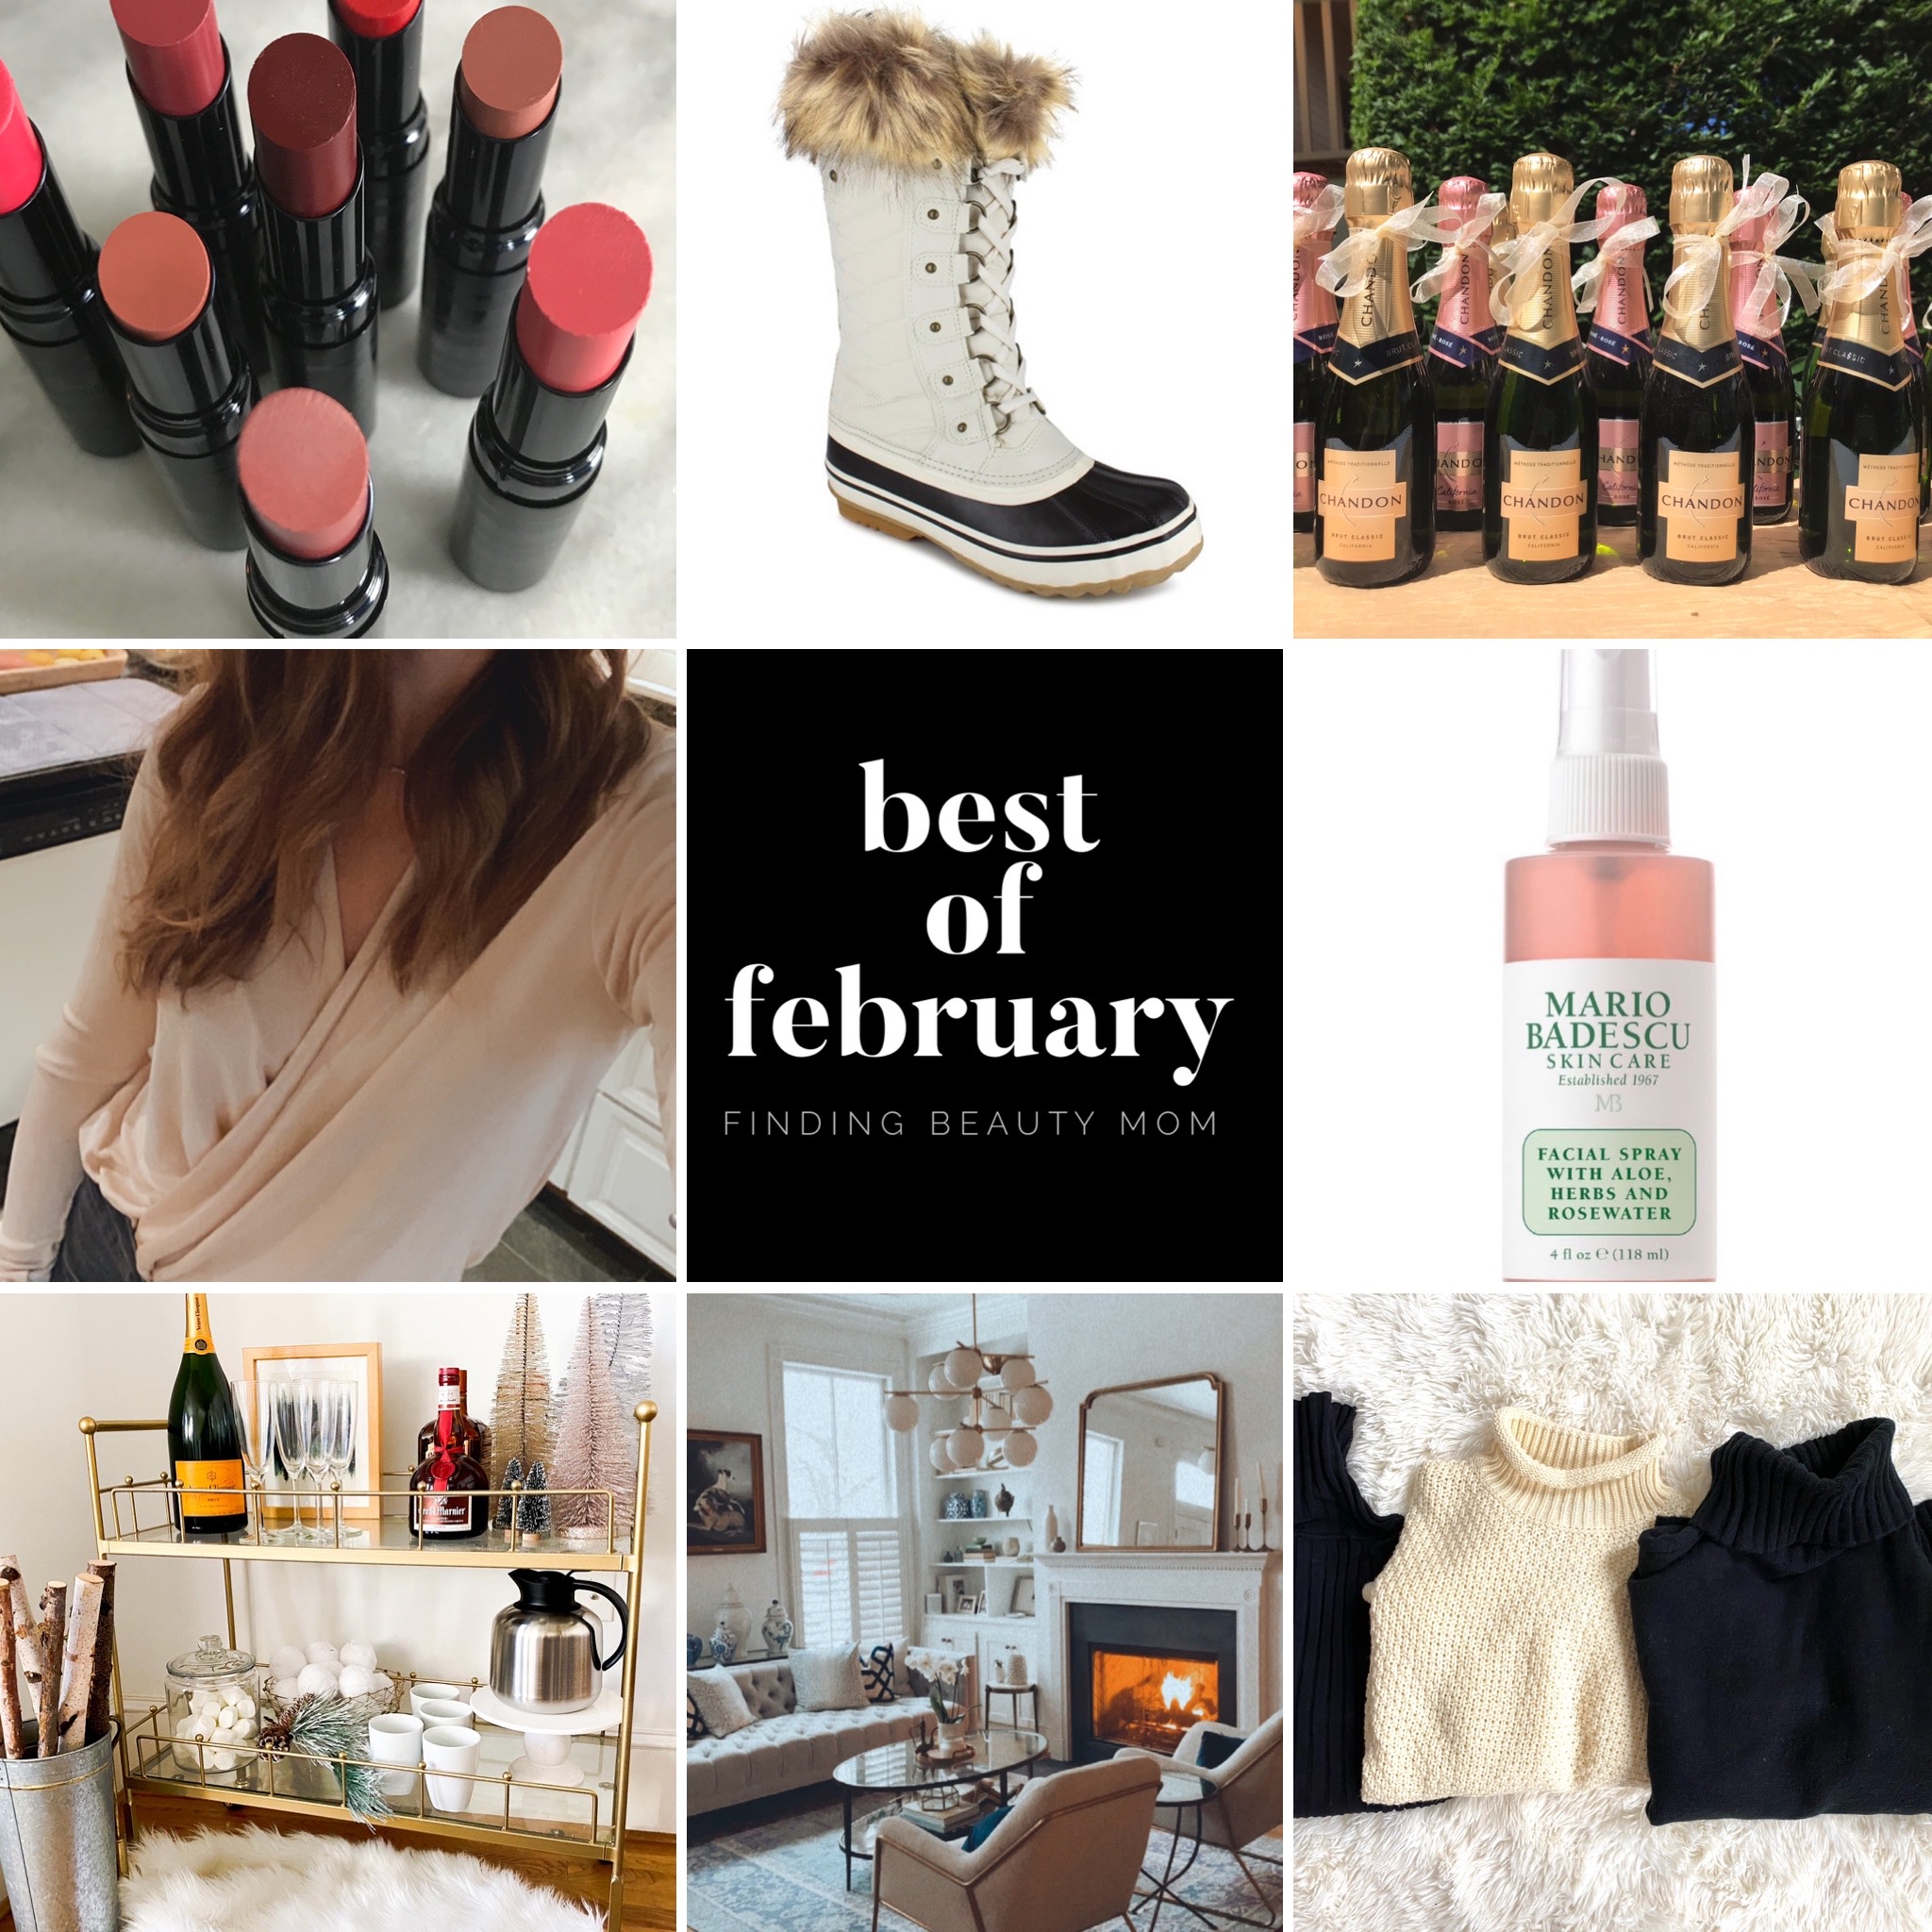 February outfit ideas, February best sellers, what to wear in February, finding beauty mom winter style 